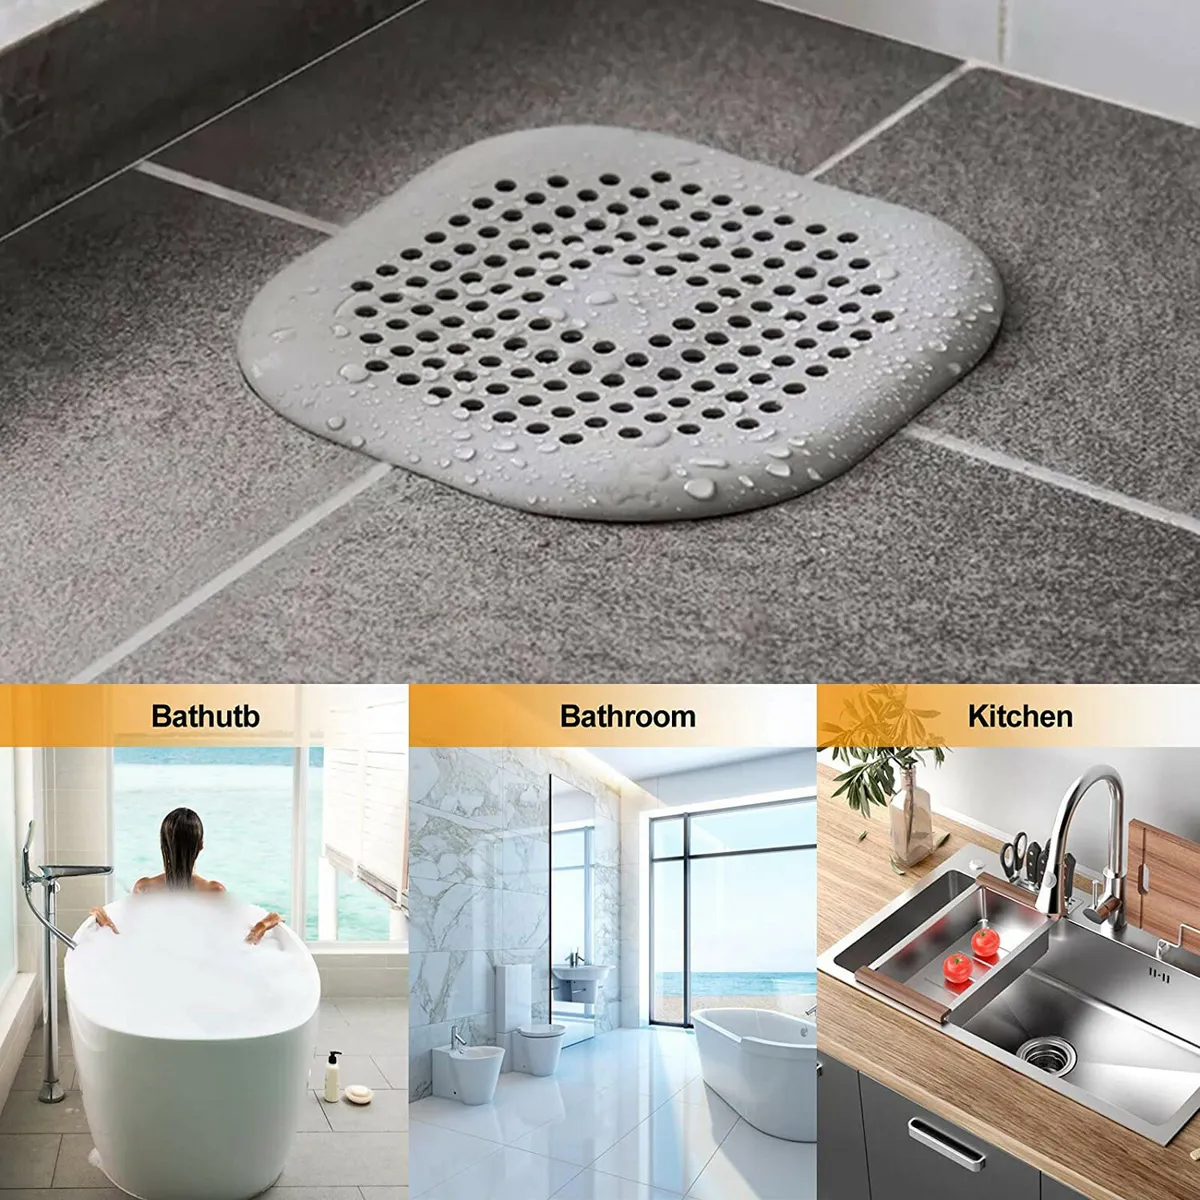 Shower Drains Cover Silicone Hair Stopper Filter Bathroom Drains Floor Sink  Stra